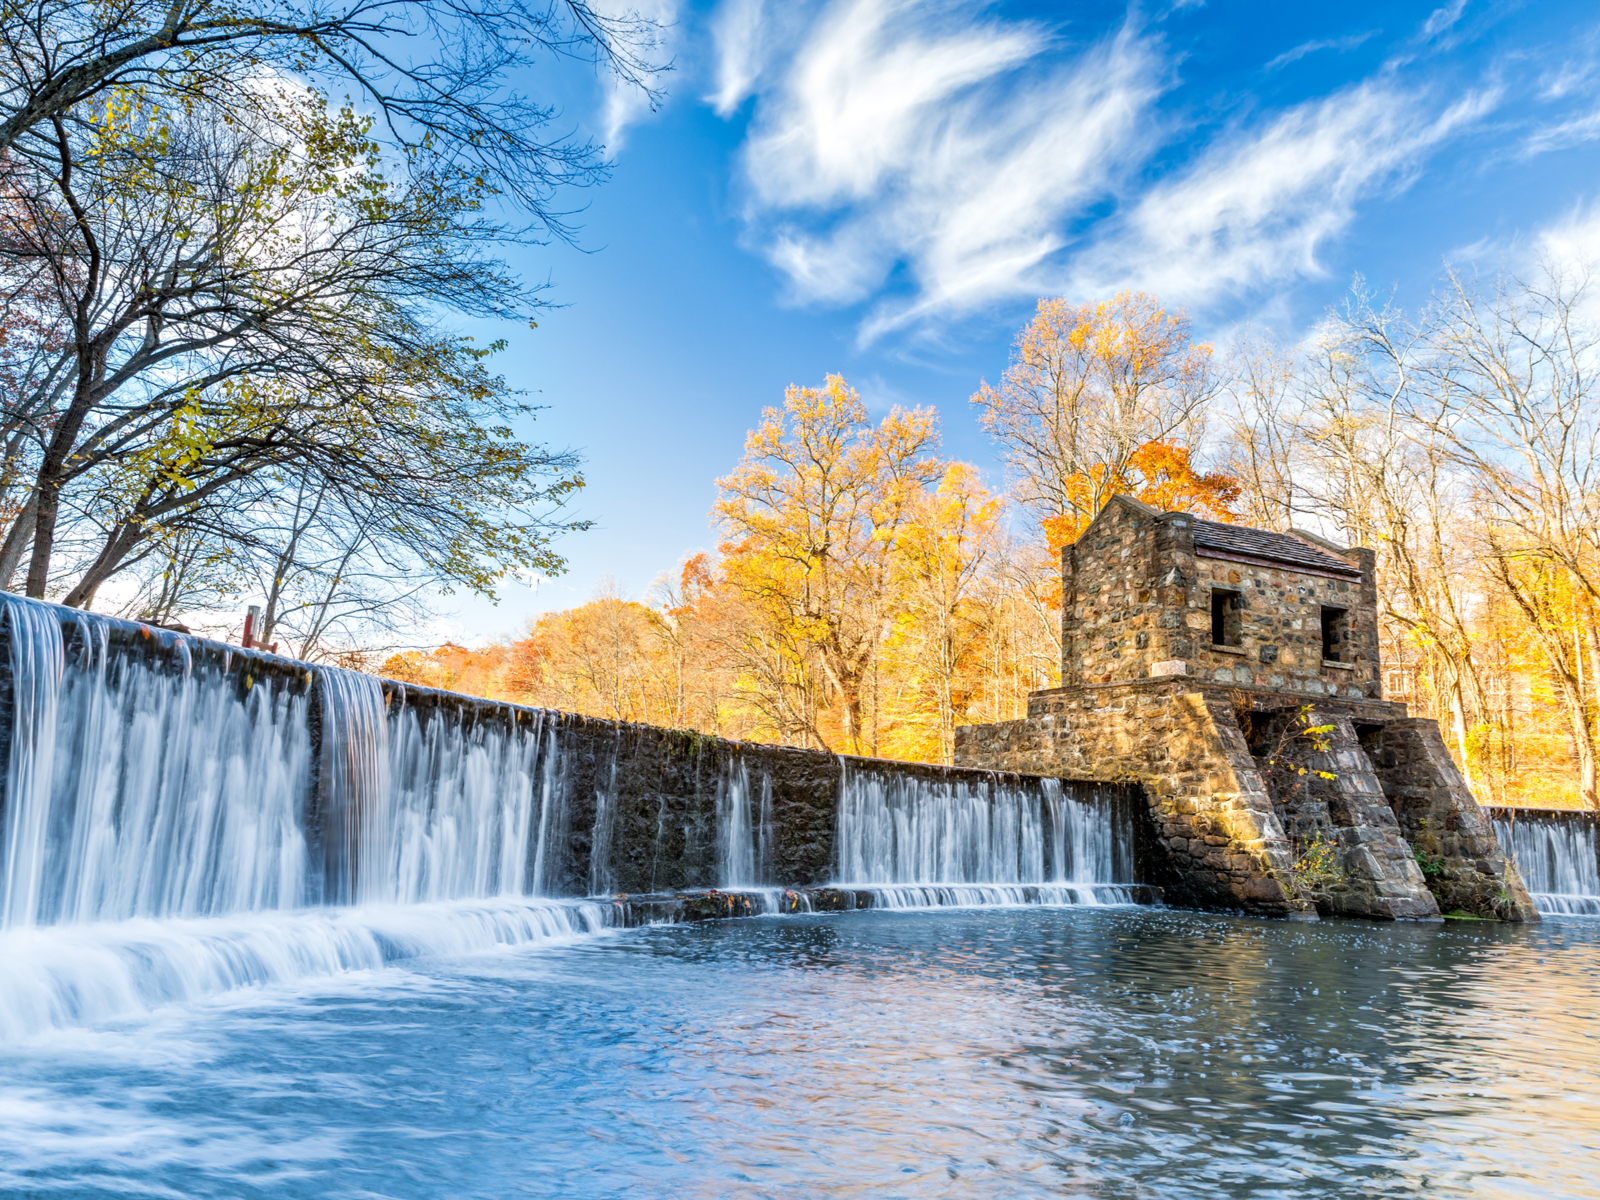 Historia speedwell dam, one of the best things to do in New Jersey, as seen on a Spring day